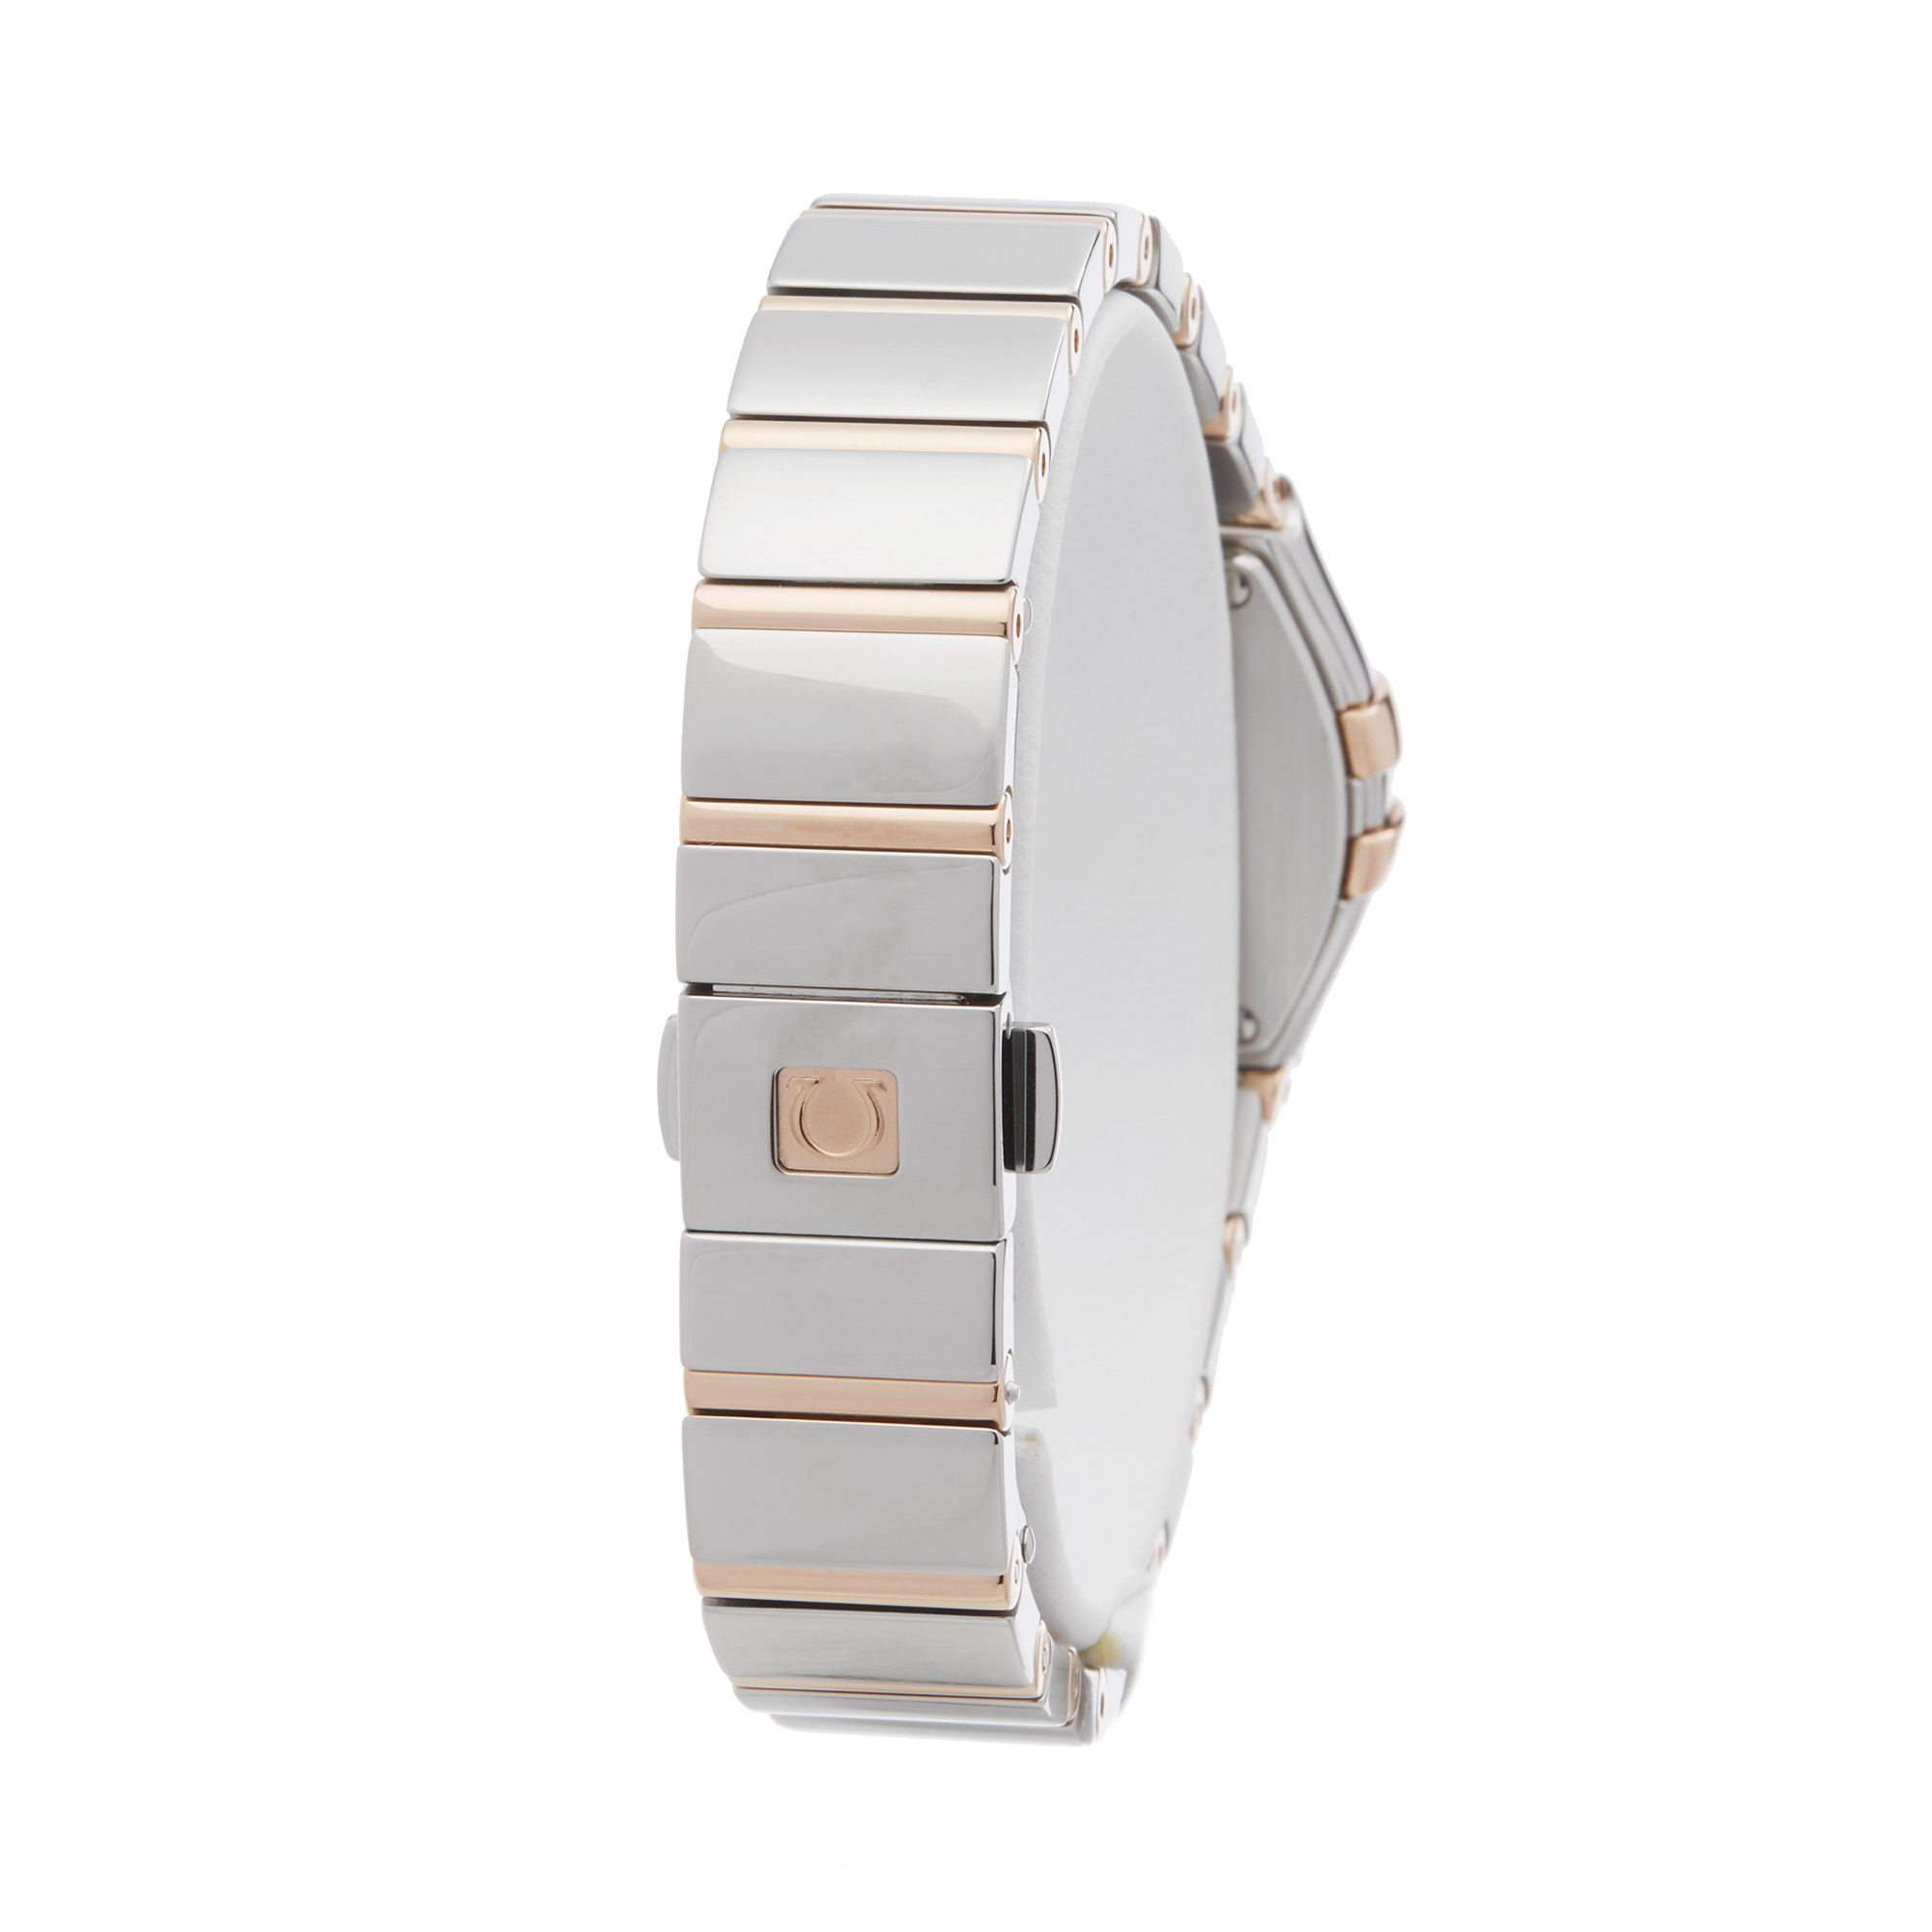 Omega Constellation 123.25.24.60.55.005 Ladies Stainless Steel & Rose Gold Diamond Mother Of Pearl - Image 4 of 7